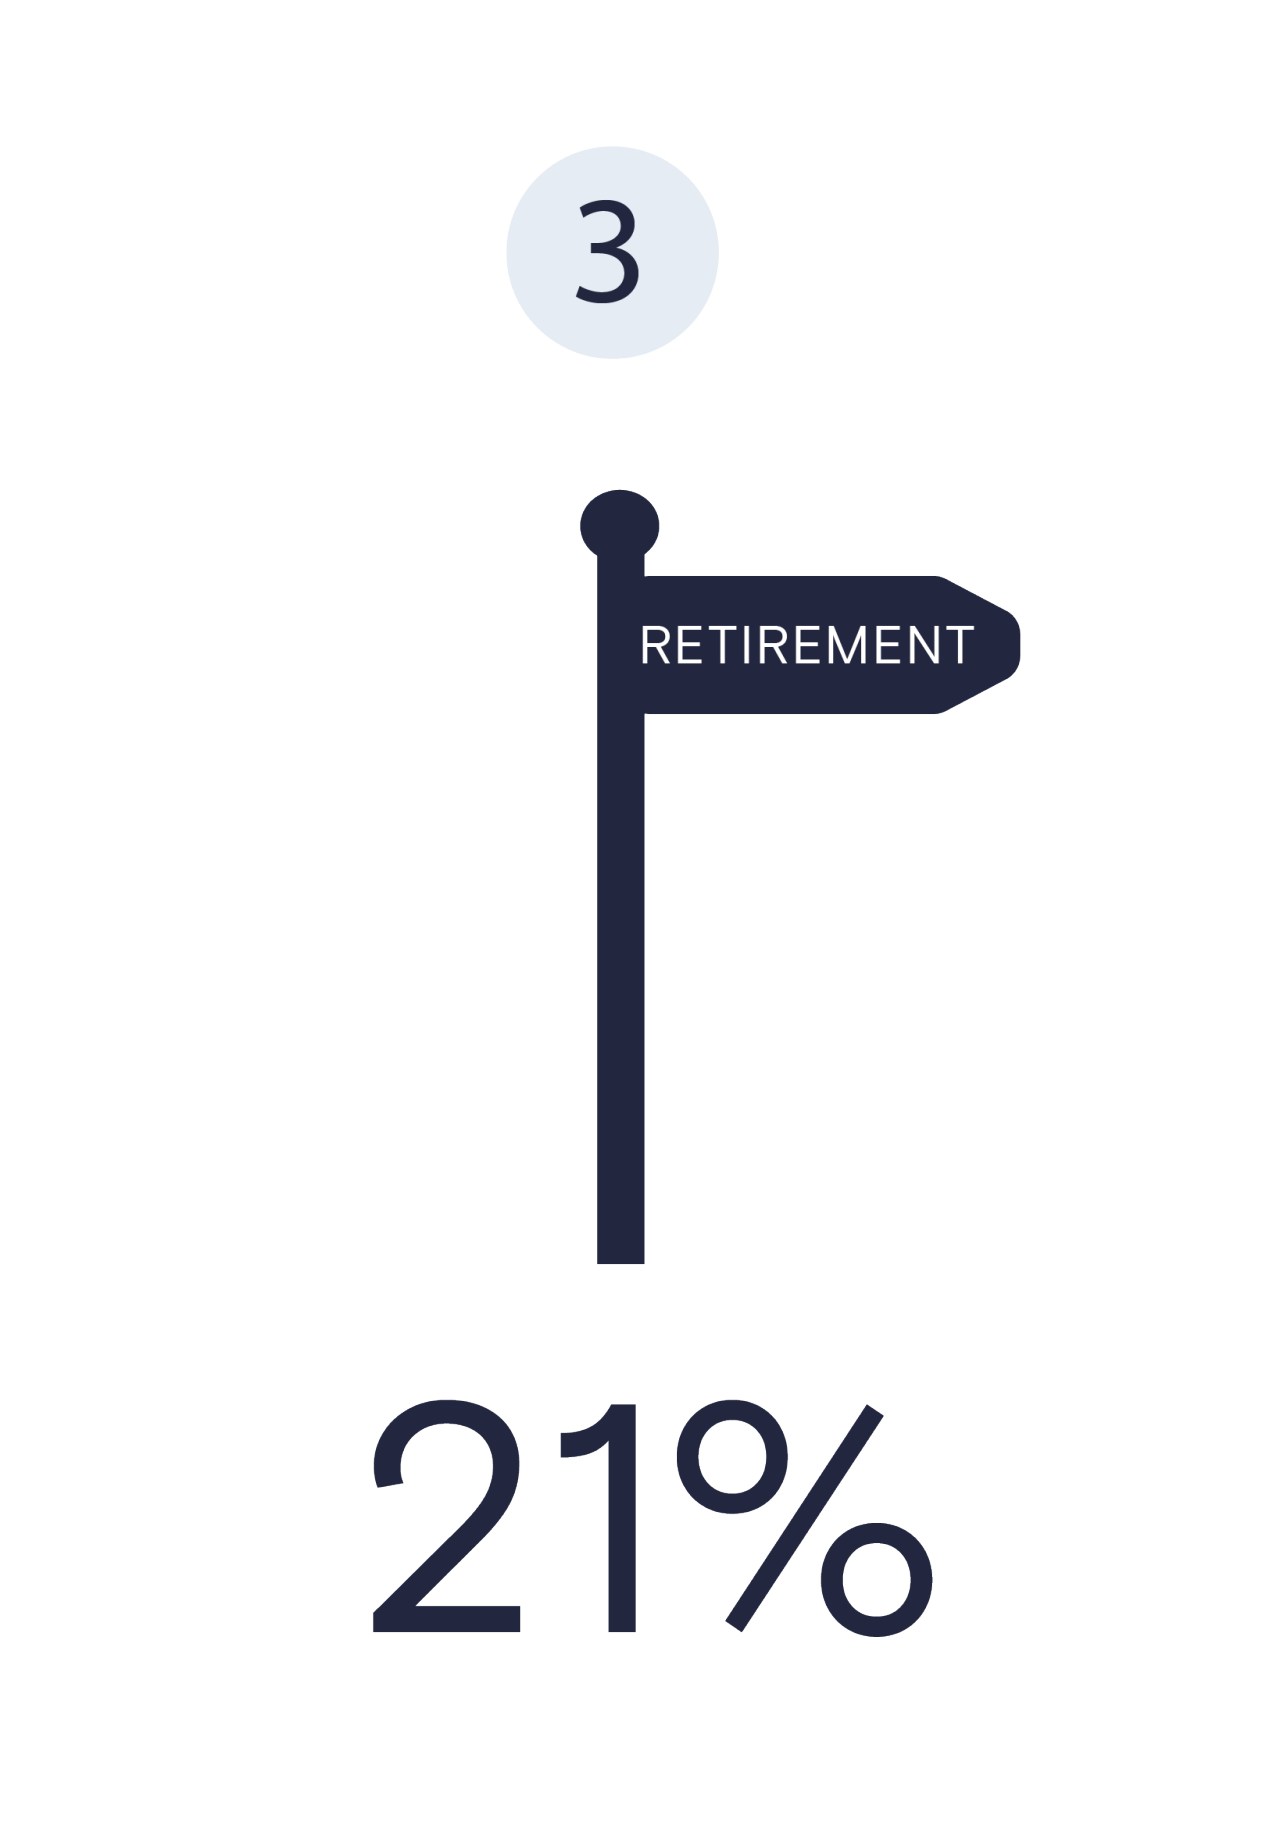 Image shows a dark blue number 3 in a light blue circle at the top. Underneath is a dark blue icon of a signpost pointing to the right labelled 'retirement'.  Underneath the signpost is dark blue text which reads '21%' representing the number of people who save to retire early.